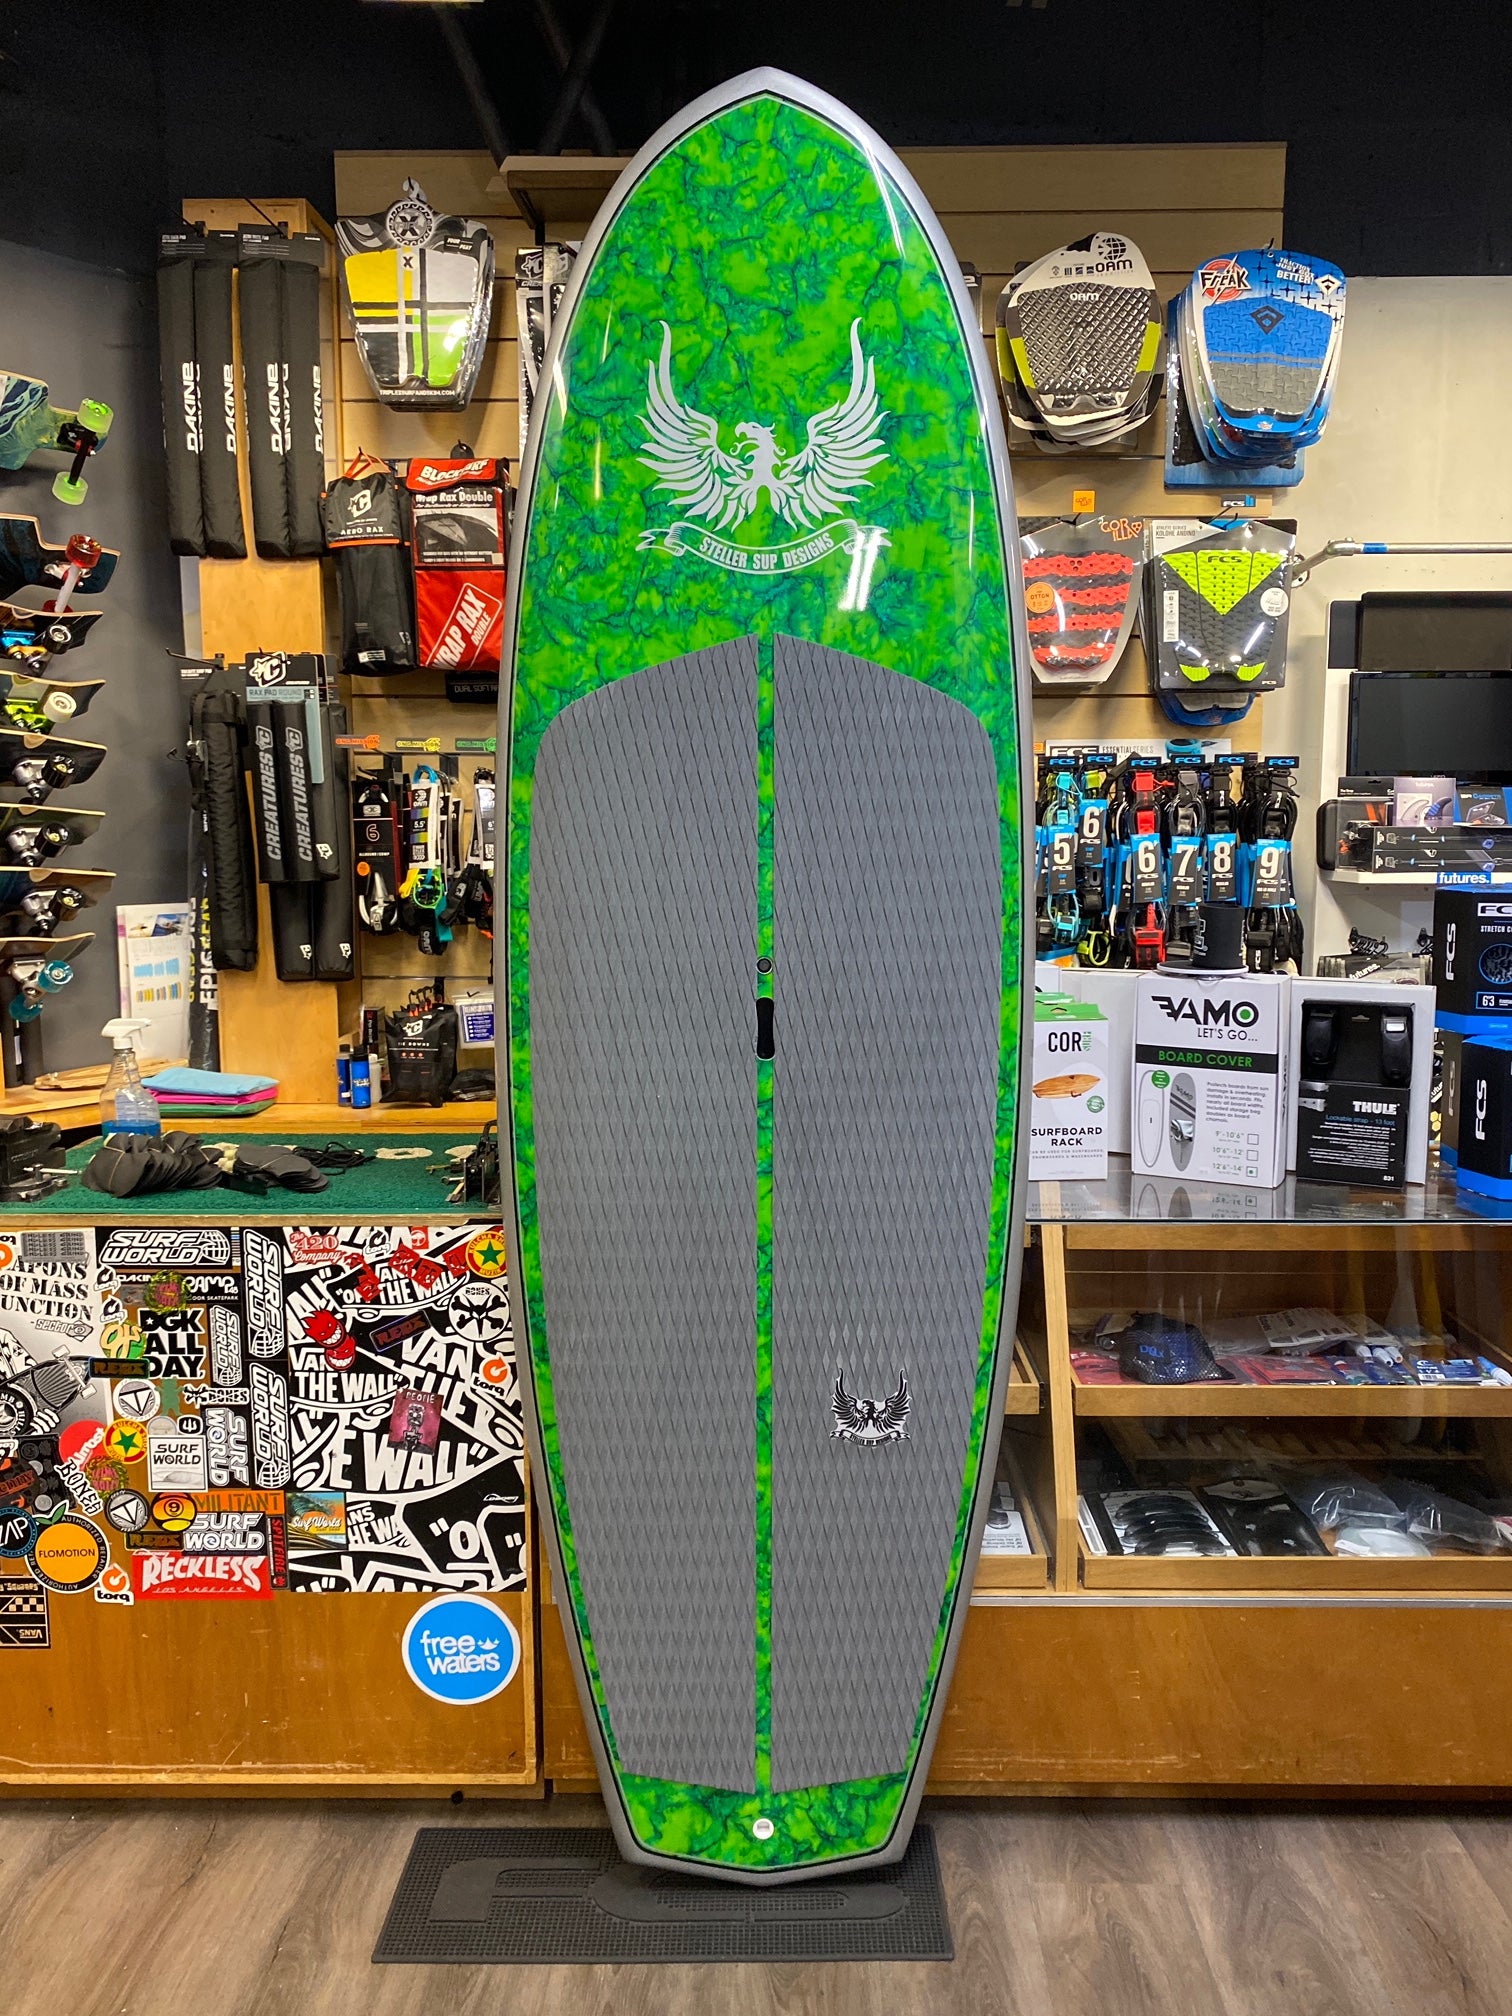 SOLD OUT Steller 9'0 x 33.25" D Wing Batik Fiber SUP Stand Up Paddle Board 153L SUP Board